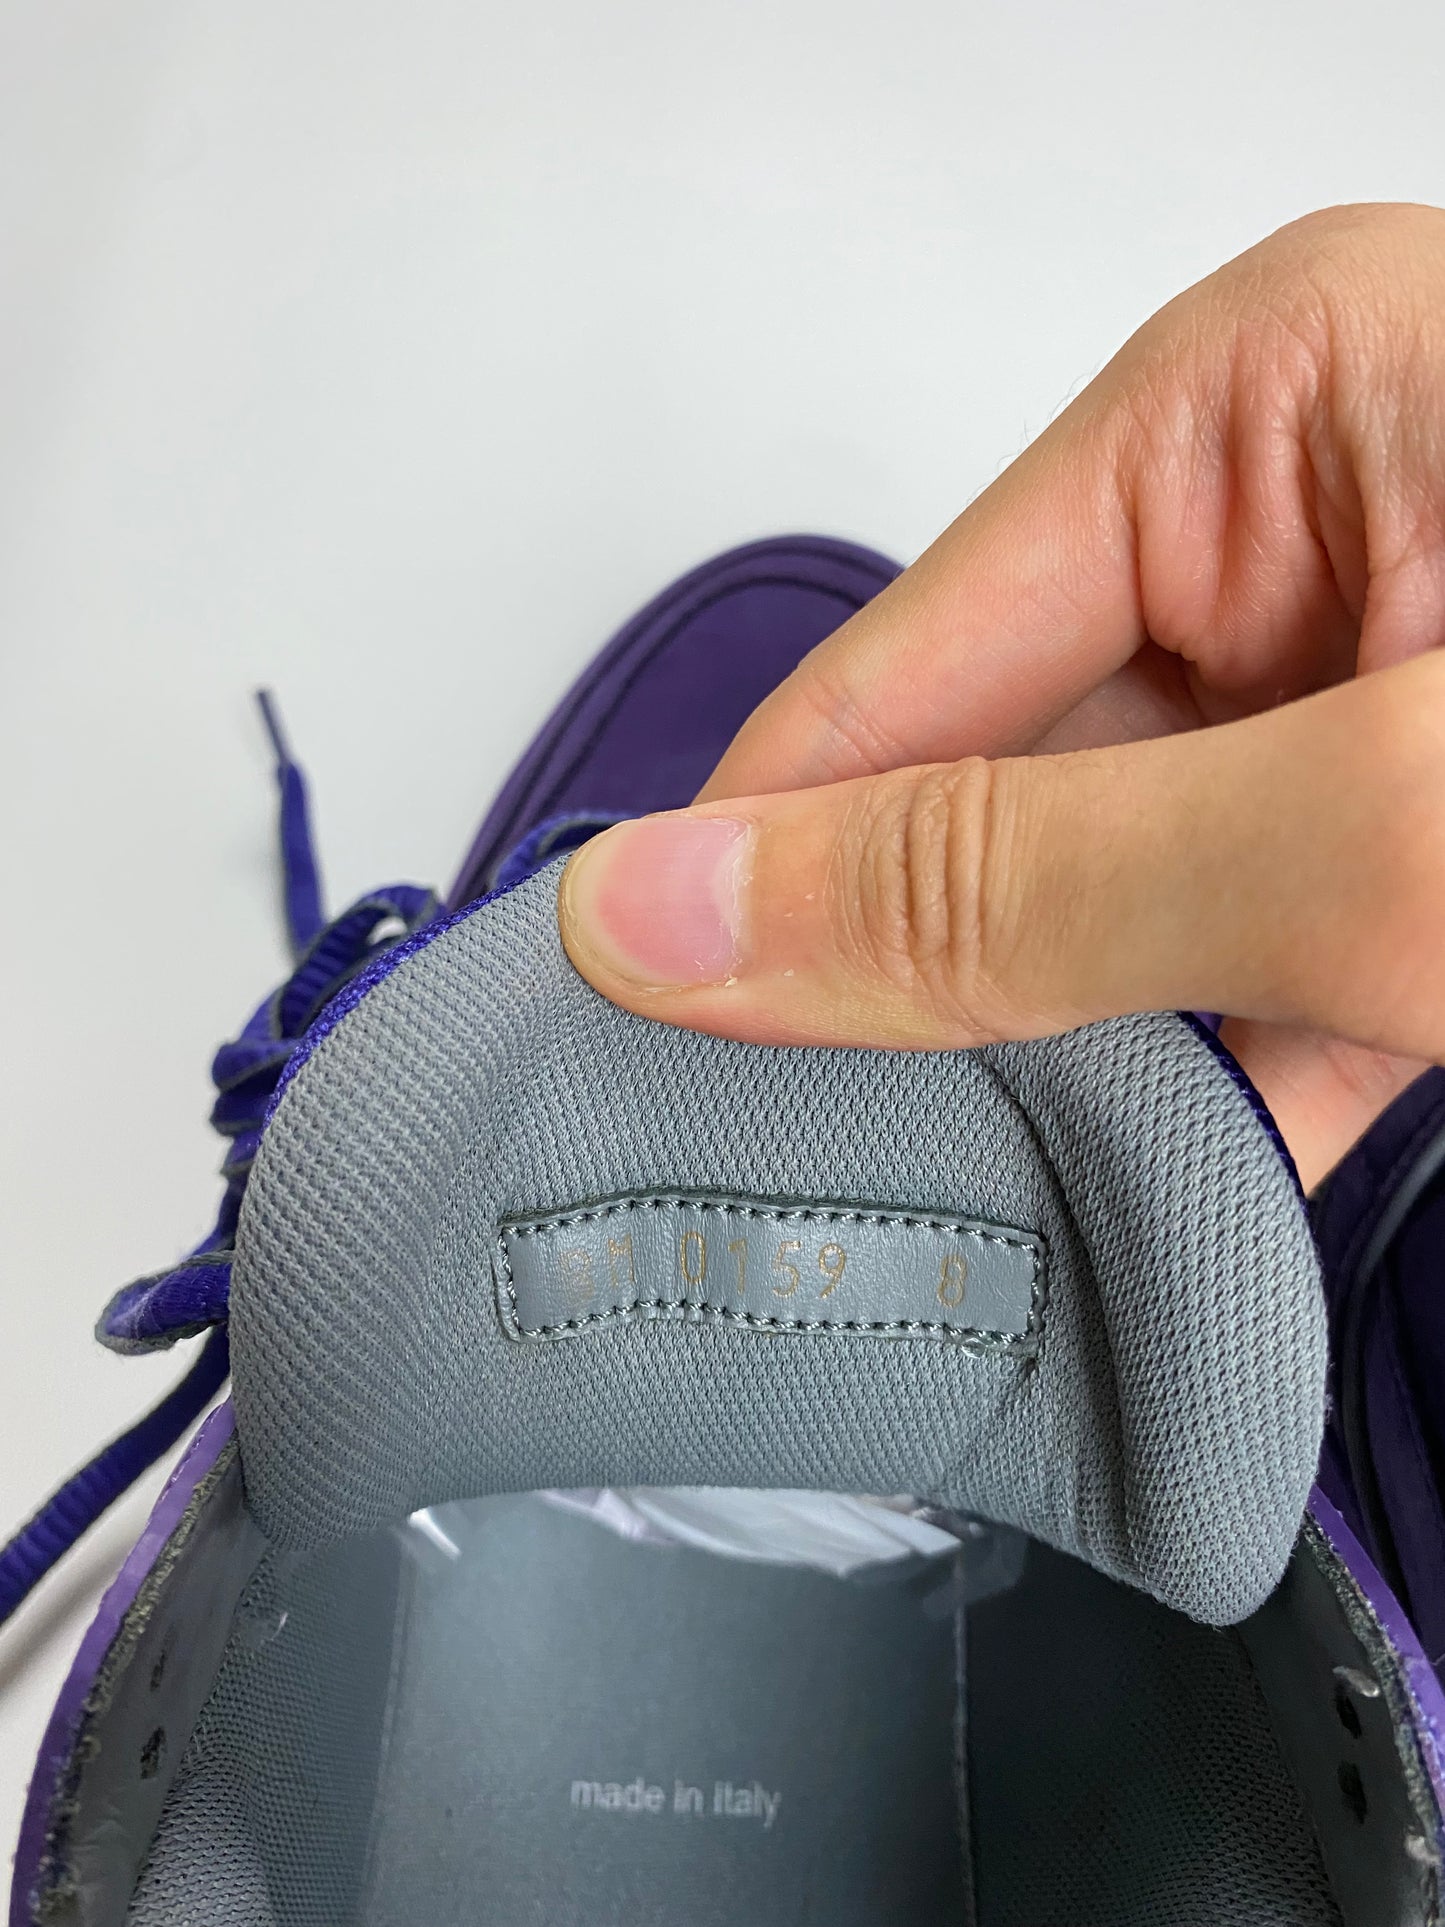 LV AW19 runway Asia exclusive trainer sneakers in purple SZ:LV8